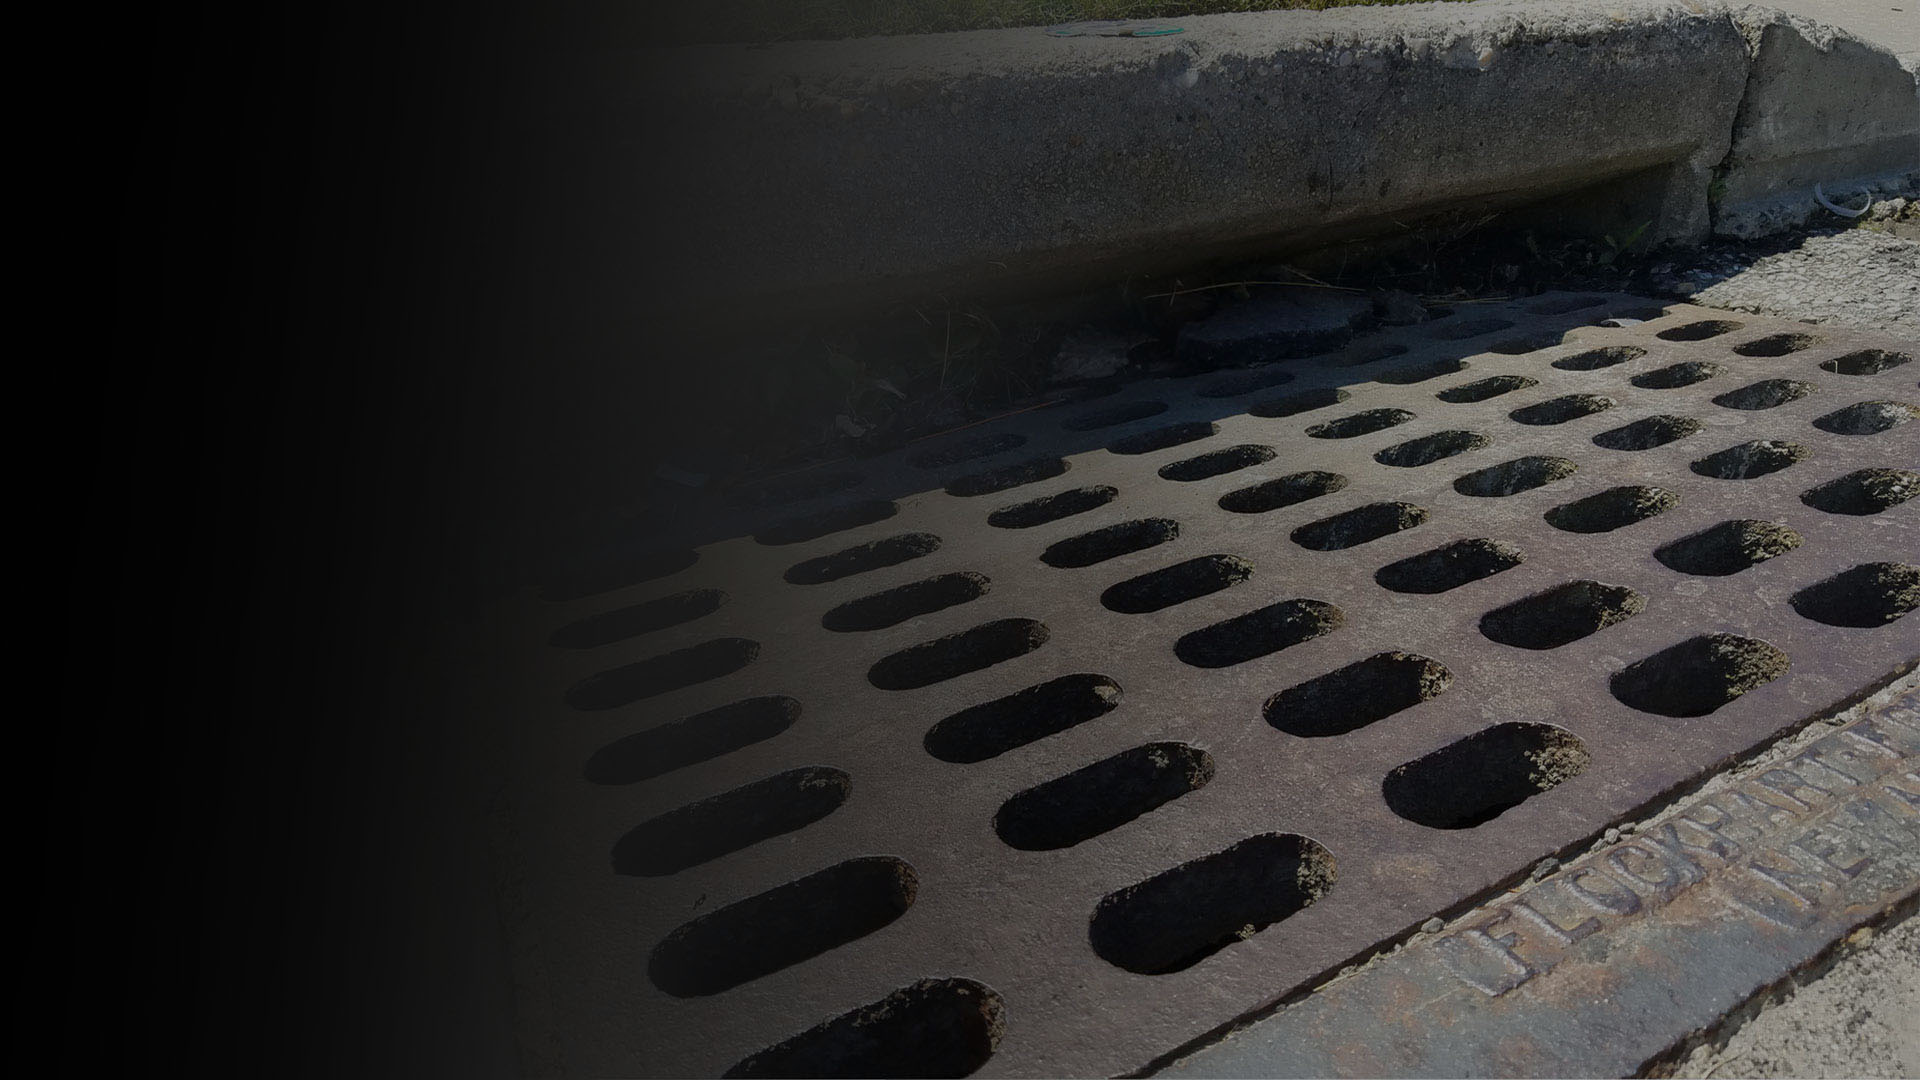 All Storm Drains Inc. | Parking Lot Catch Basin Service | Nassau & Suffolk County, Long Island, NY | Phone: 516.825.1010 Fax: 631.475.2898 | George@AllStormDrains.com